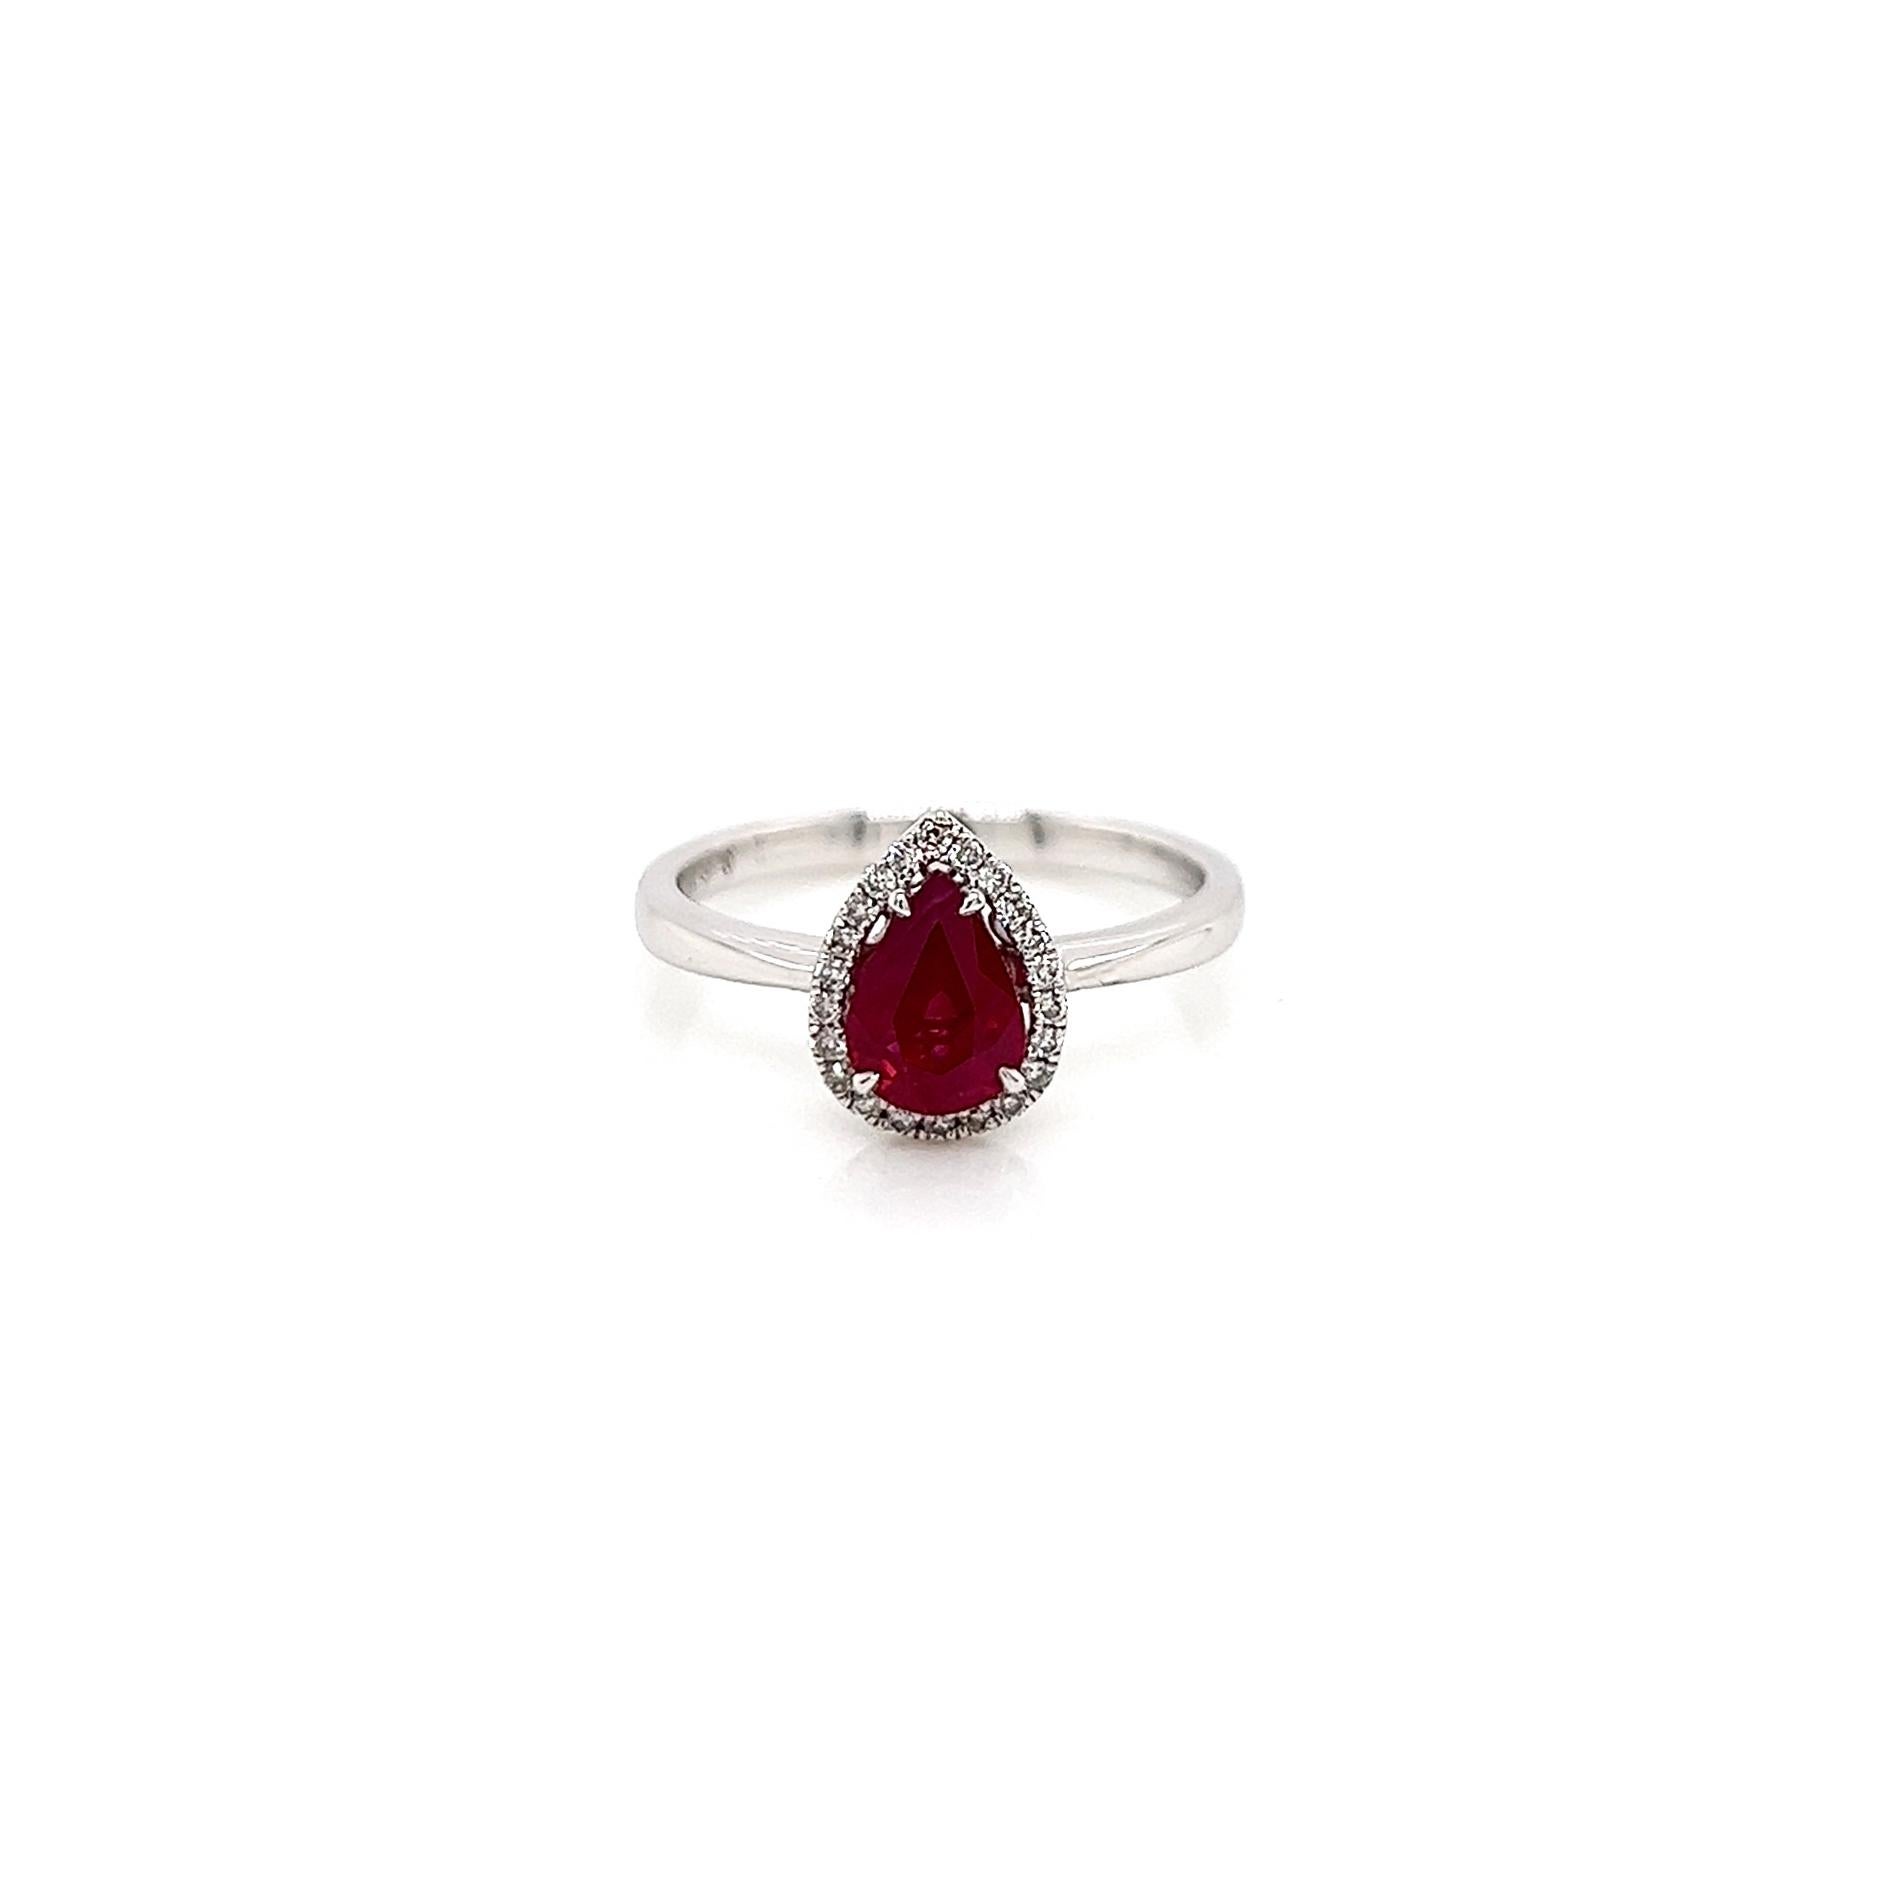 1.14 Total Carat Ruby Diamond Engagement Ring

-Metal Type: 18K White Gold
-1.02 Carat Pear Cut Ruby
-0.12 Carat Round Side Natural Diamonds, F-G Color, VS-SI Clarity
-Size 6.5

Made in New York City